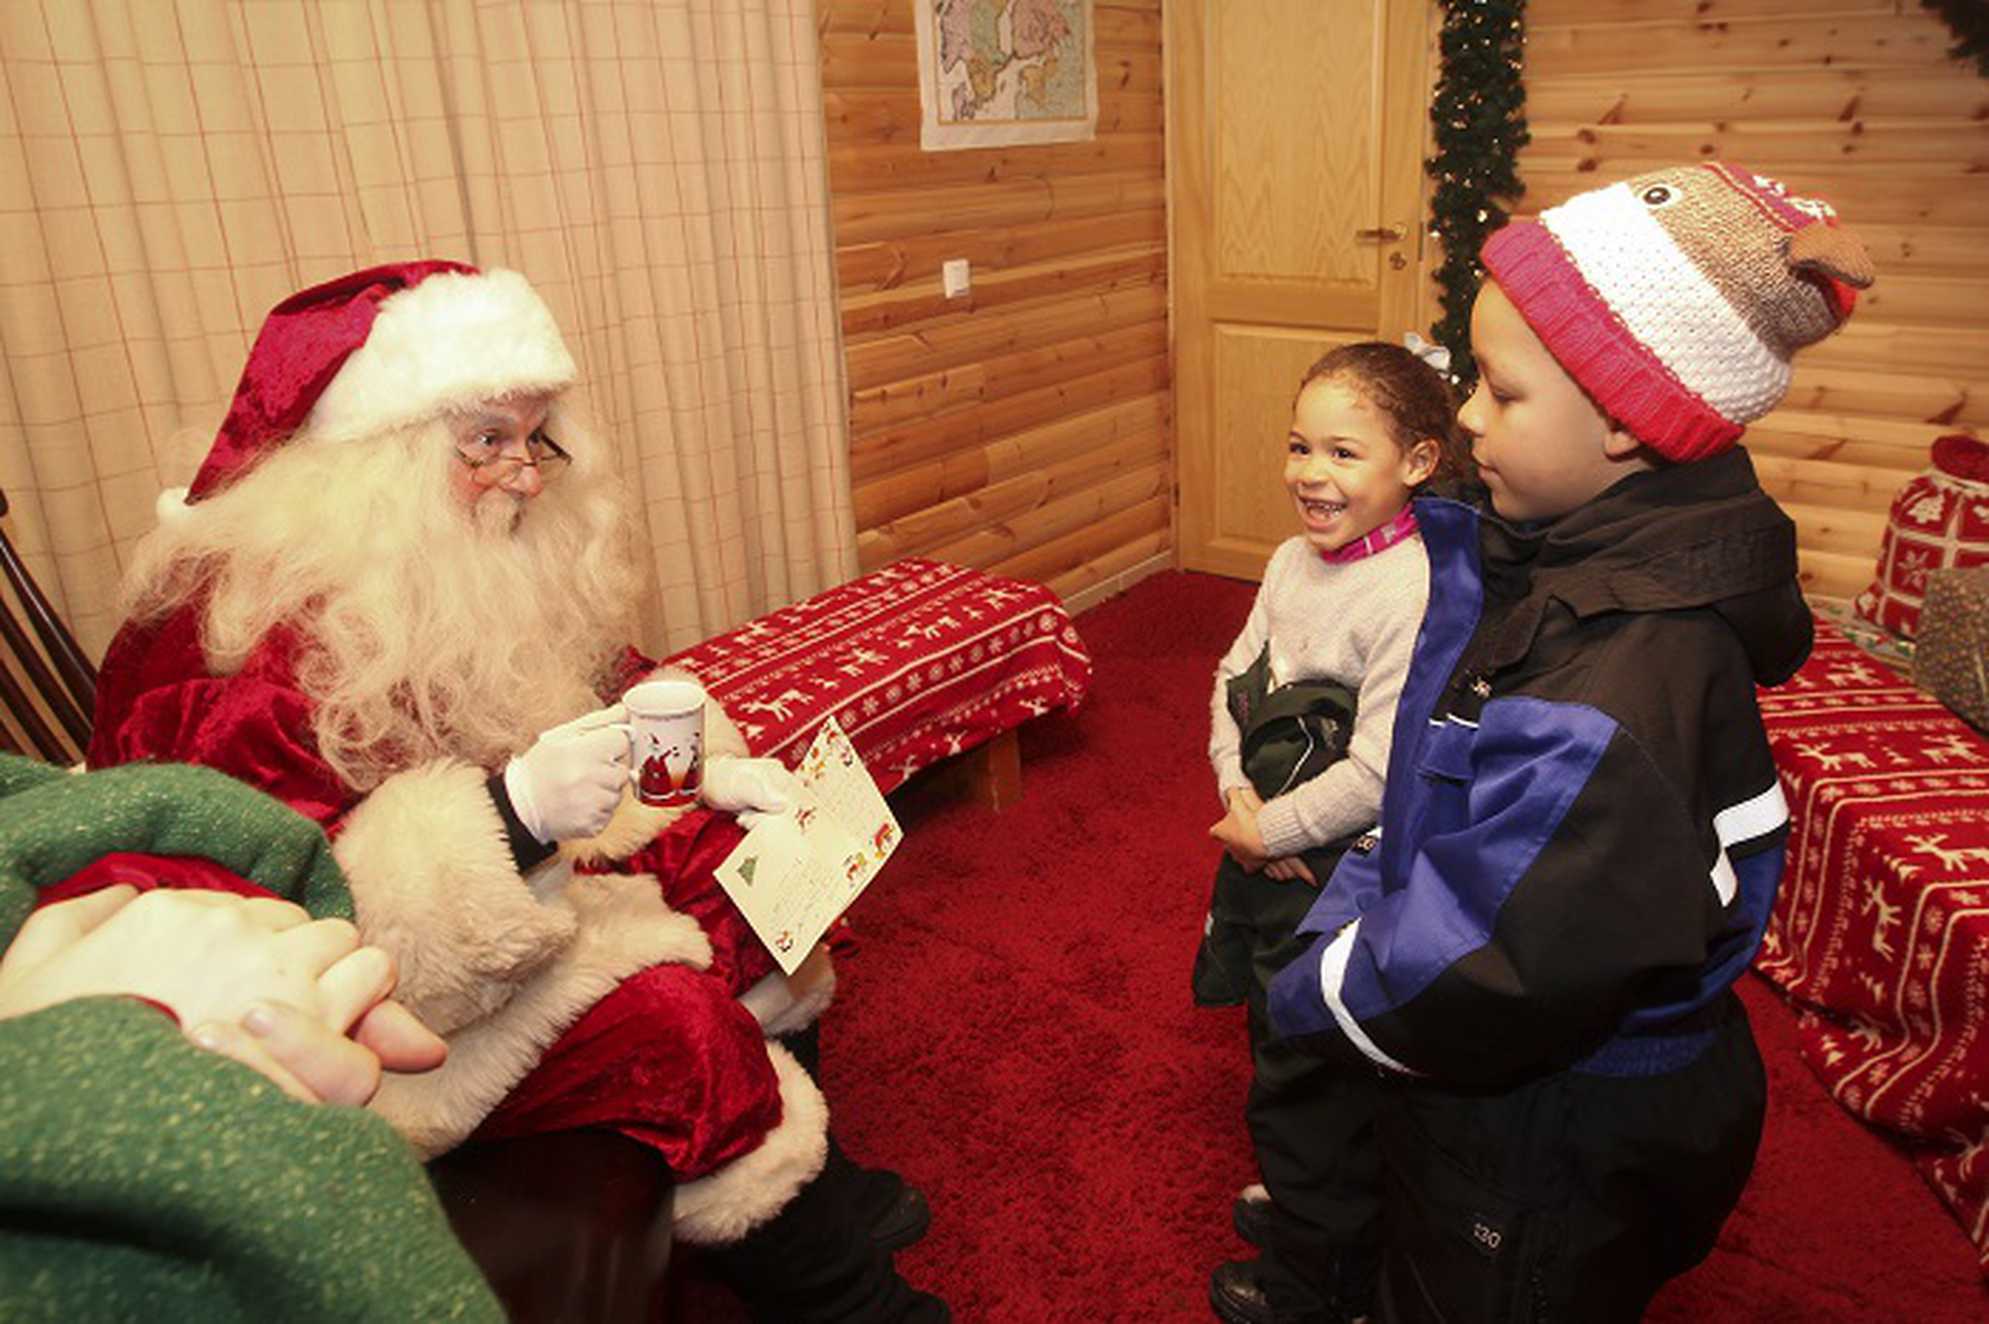 Alyssa meeting Father Christmas in Lapland.